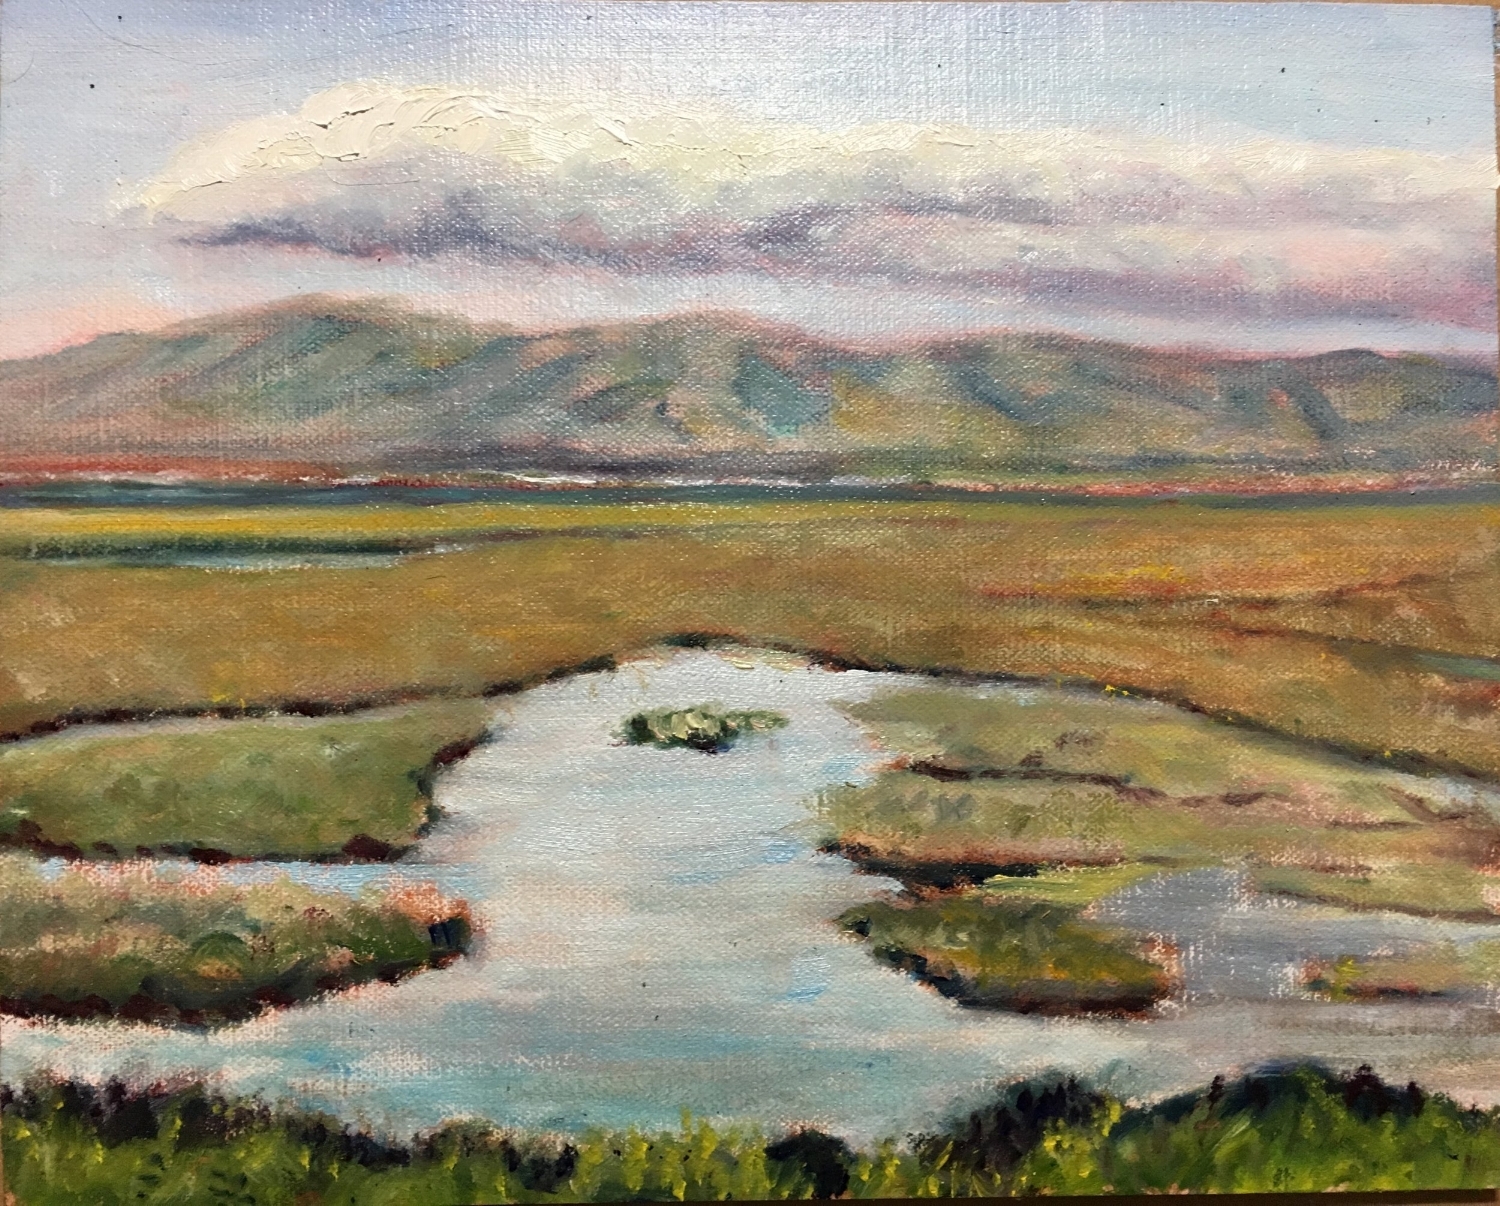 Afternoon on Baylands Marsh (8x10 - 09 May 2018)